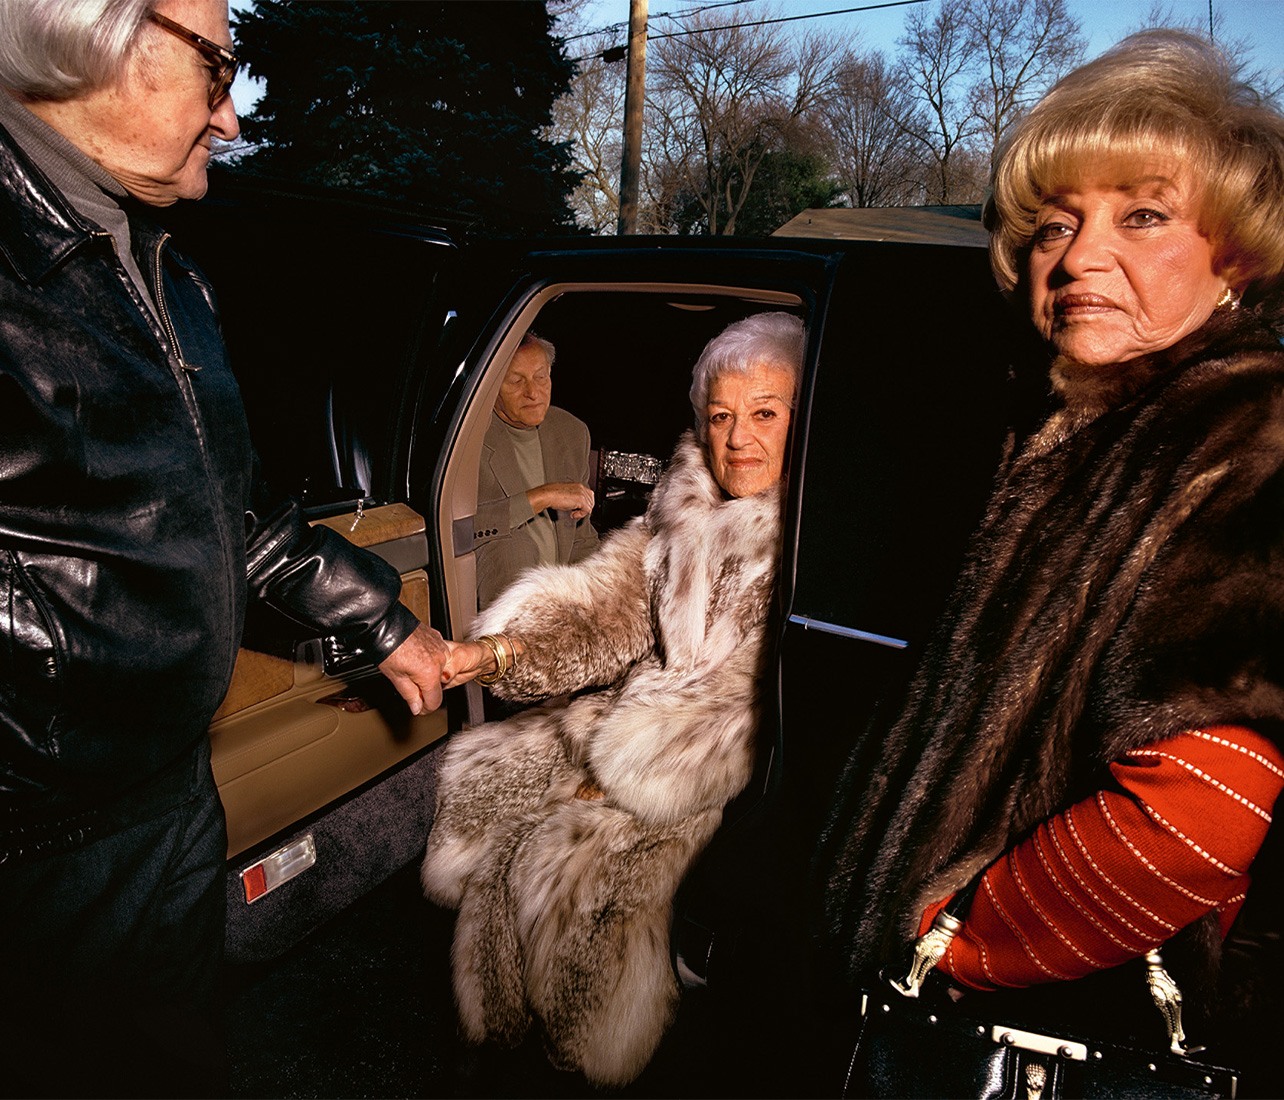 Photograph of an elderly man helping an elderly woman out of a car, dressed in an opulent fur coat